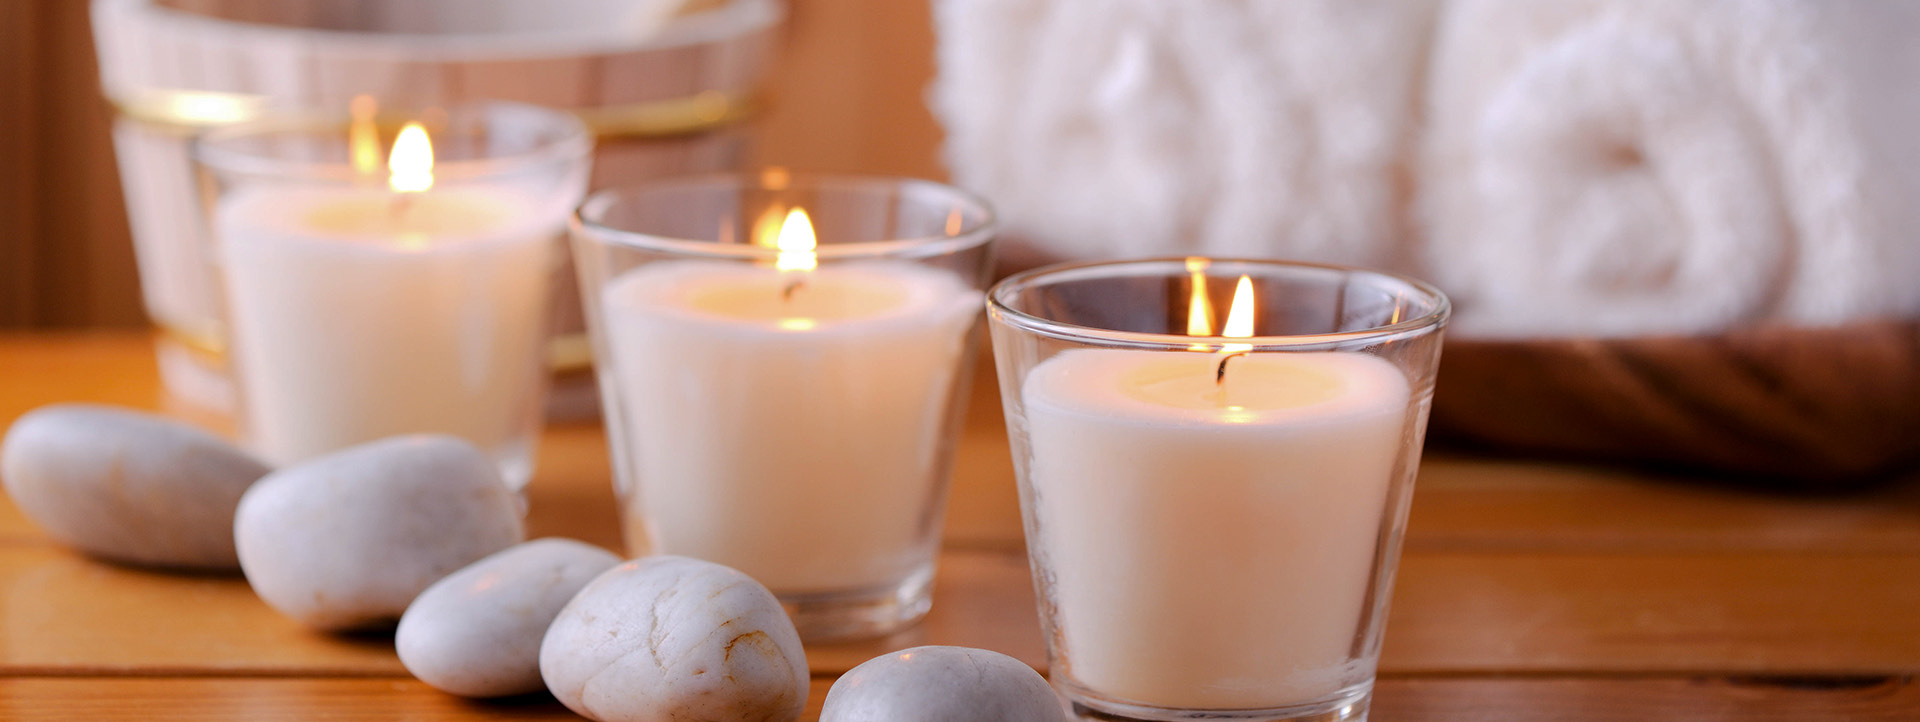 close up view of three lit candles on a table